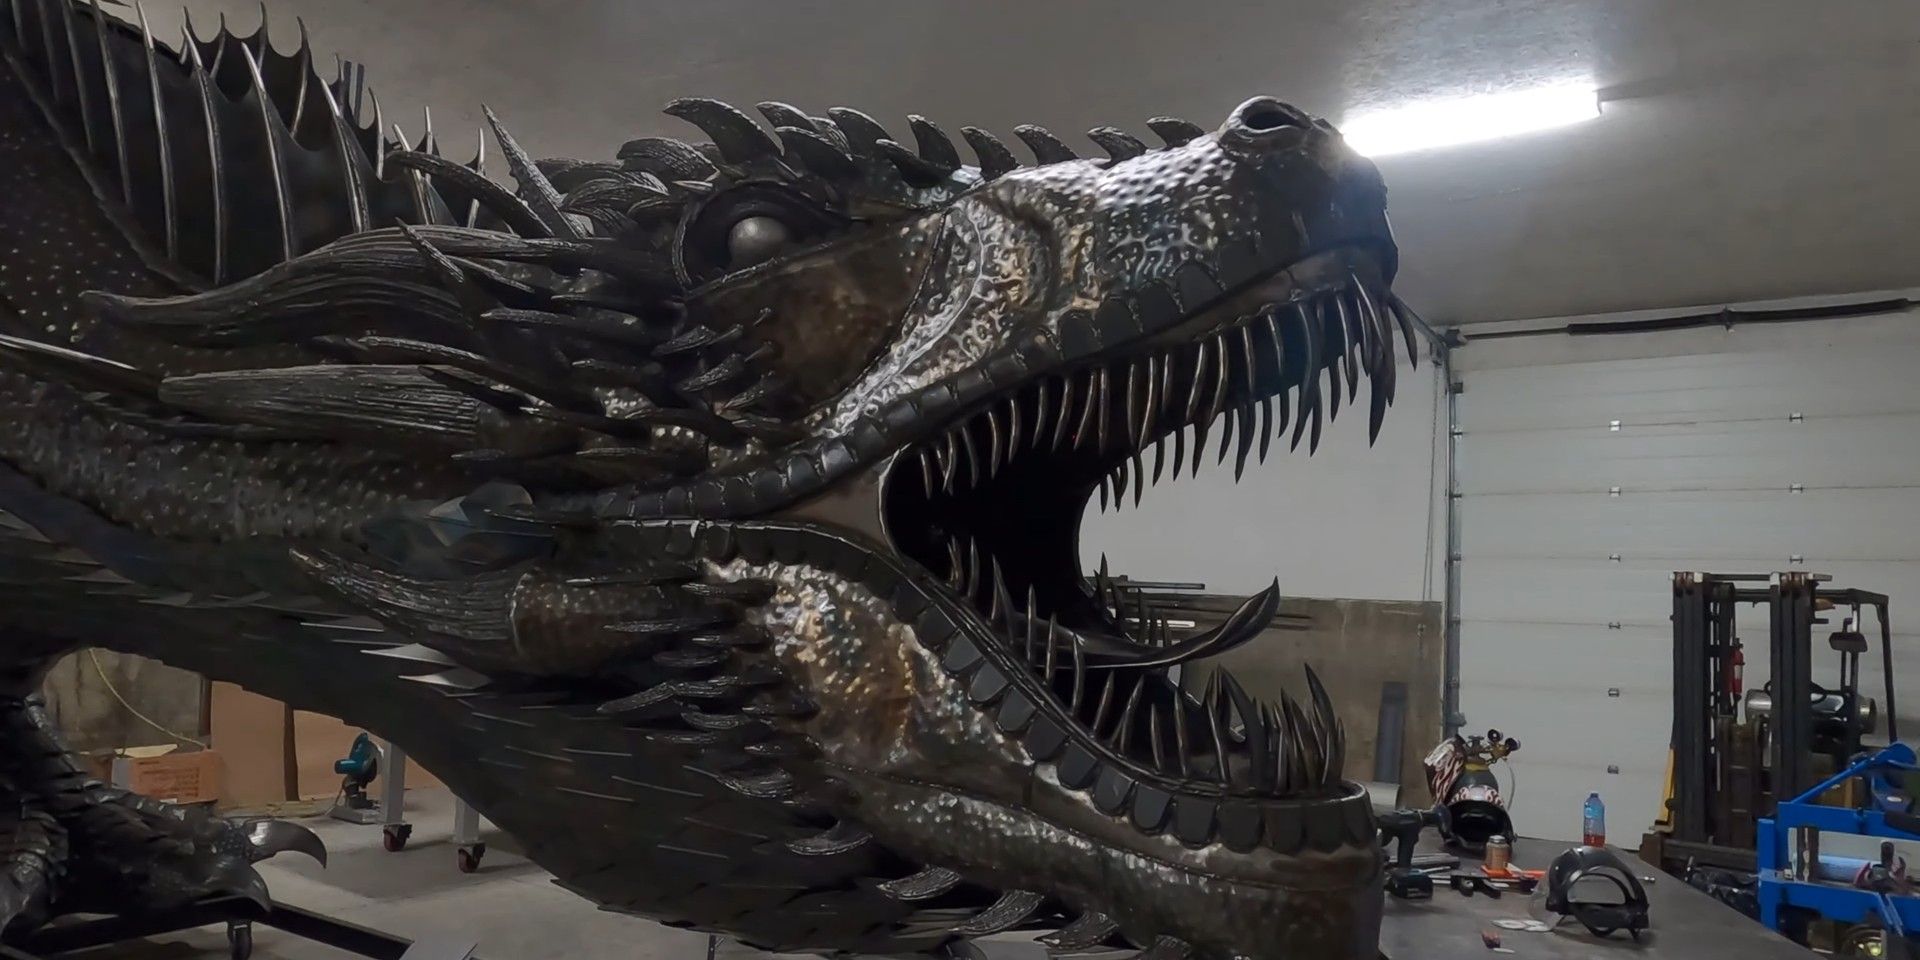 Game of Thrones Fan Creates Incredible Life-Size Drogon Sculpture